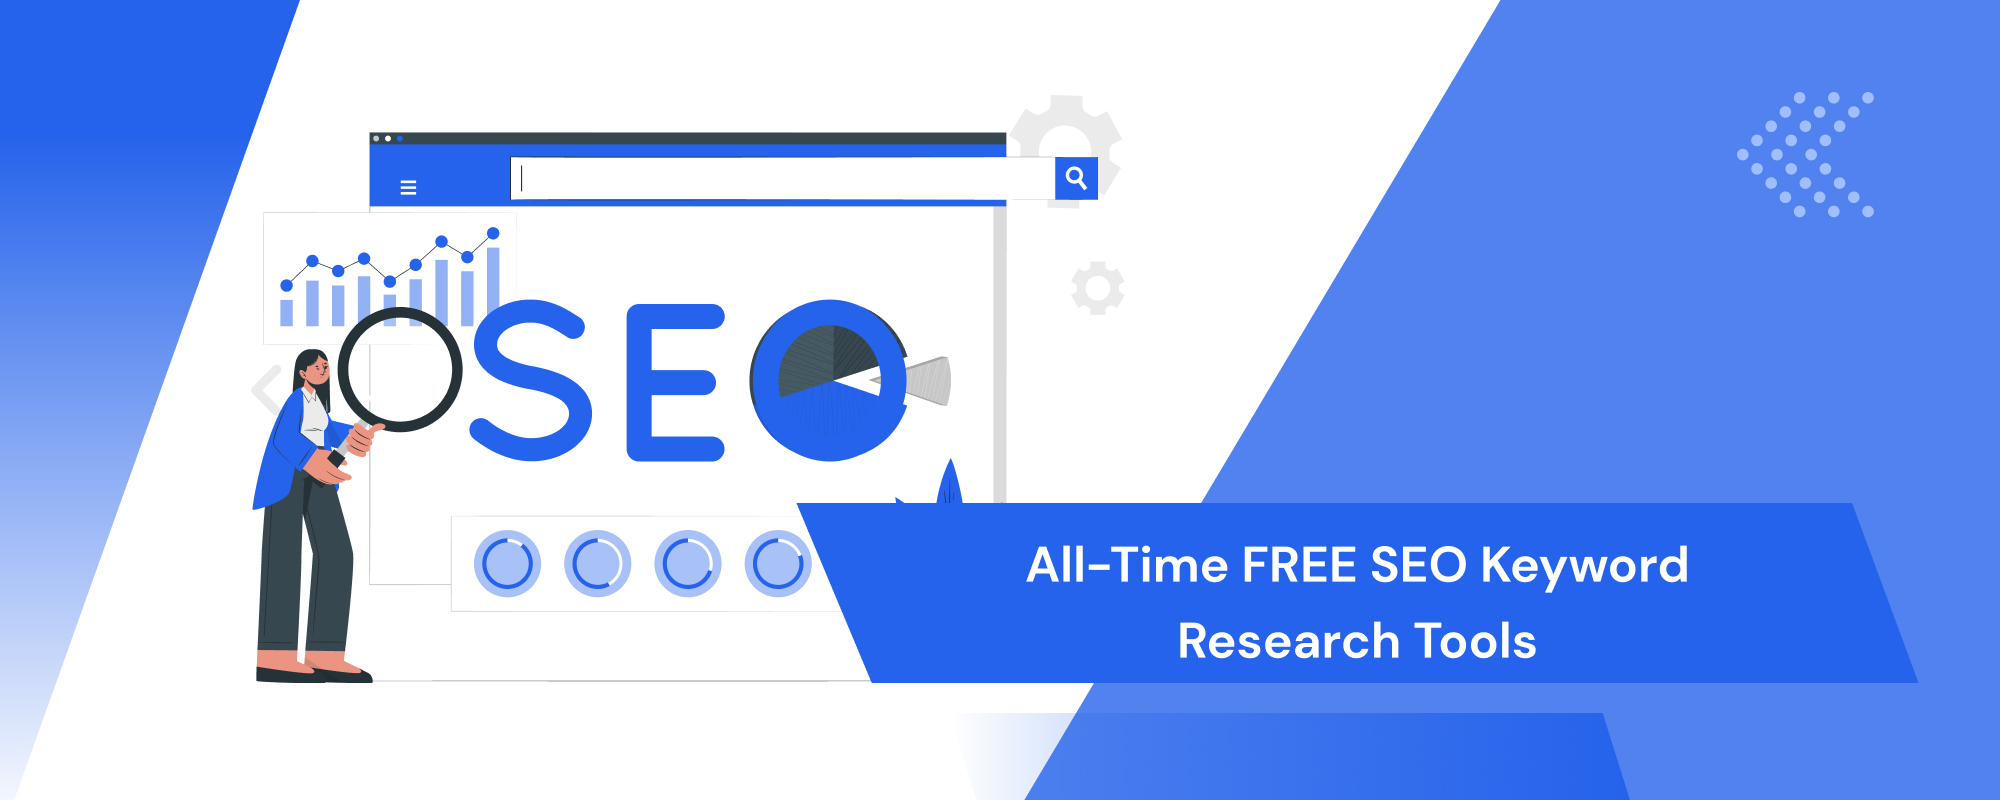 10 All-Time FREE SEO Keyword Research Tools